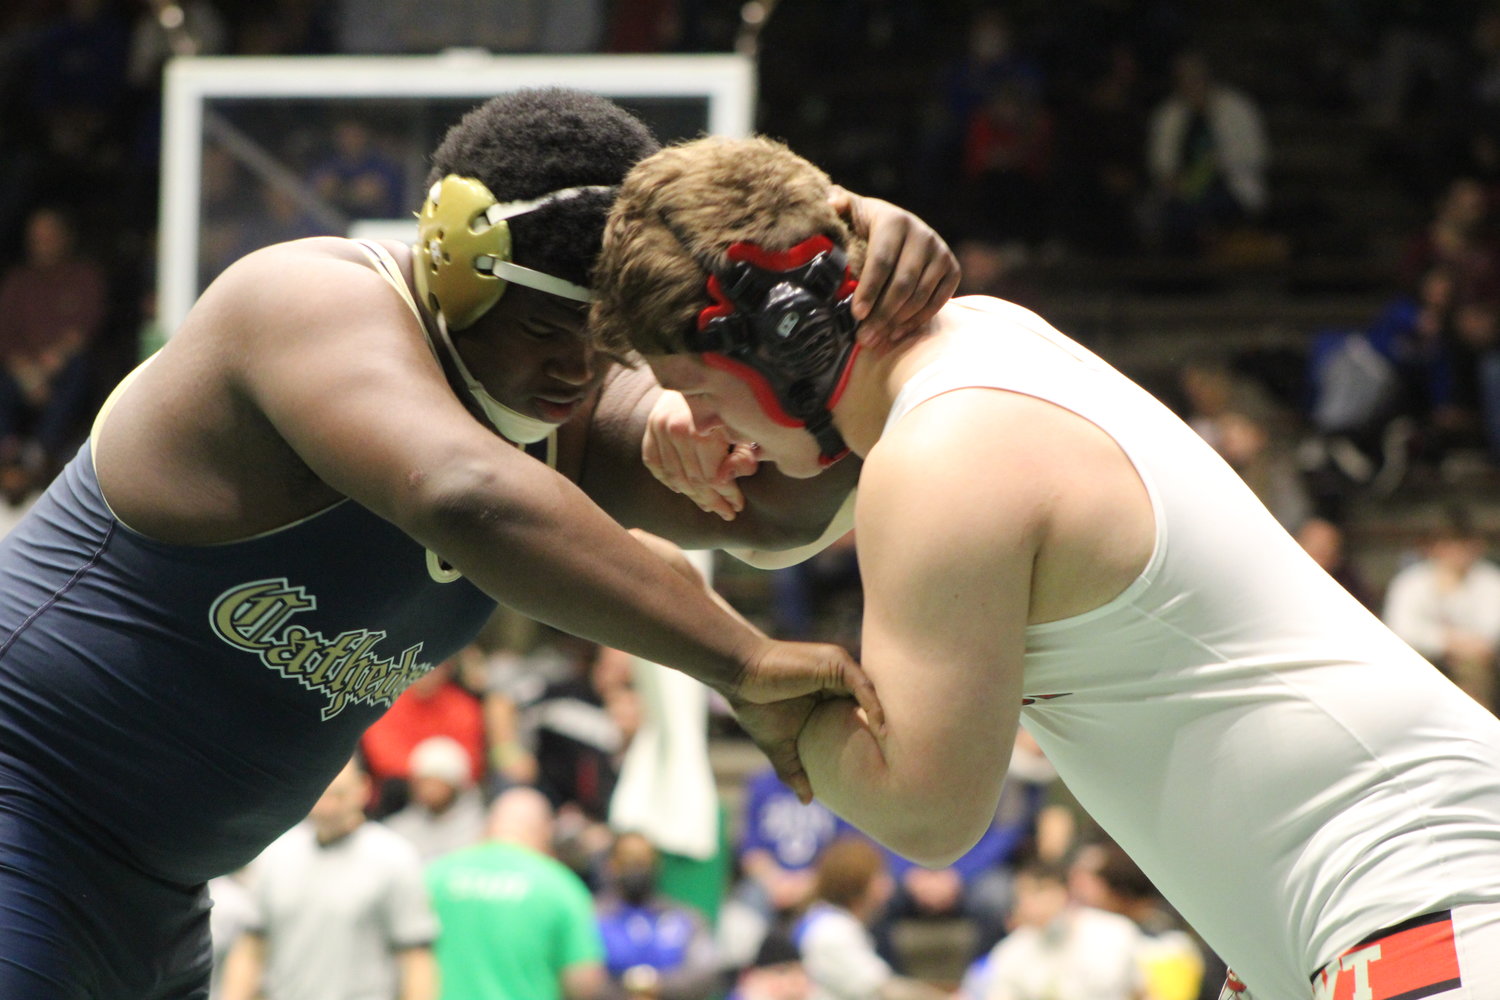 Southmont's Zayden Dunn wrestles in the opening round against Cathedral's Hosia Smith.